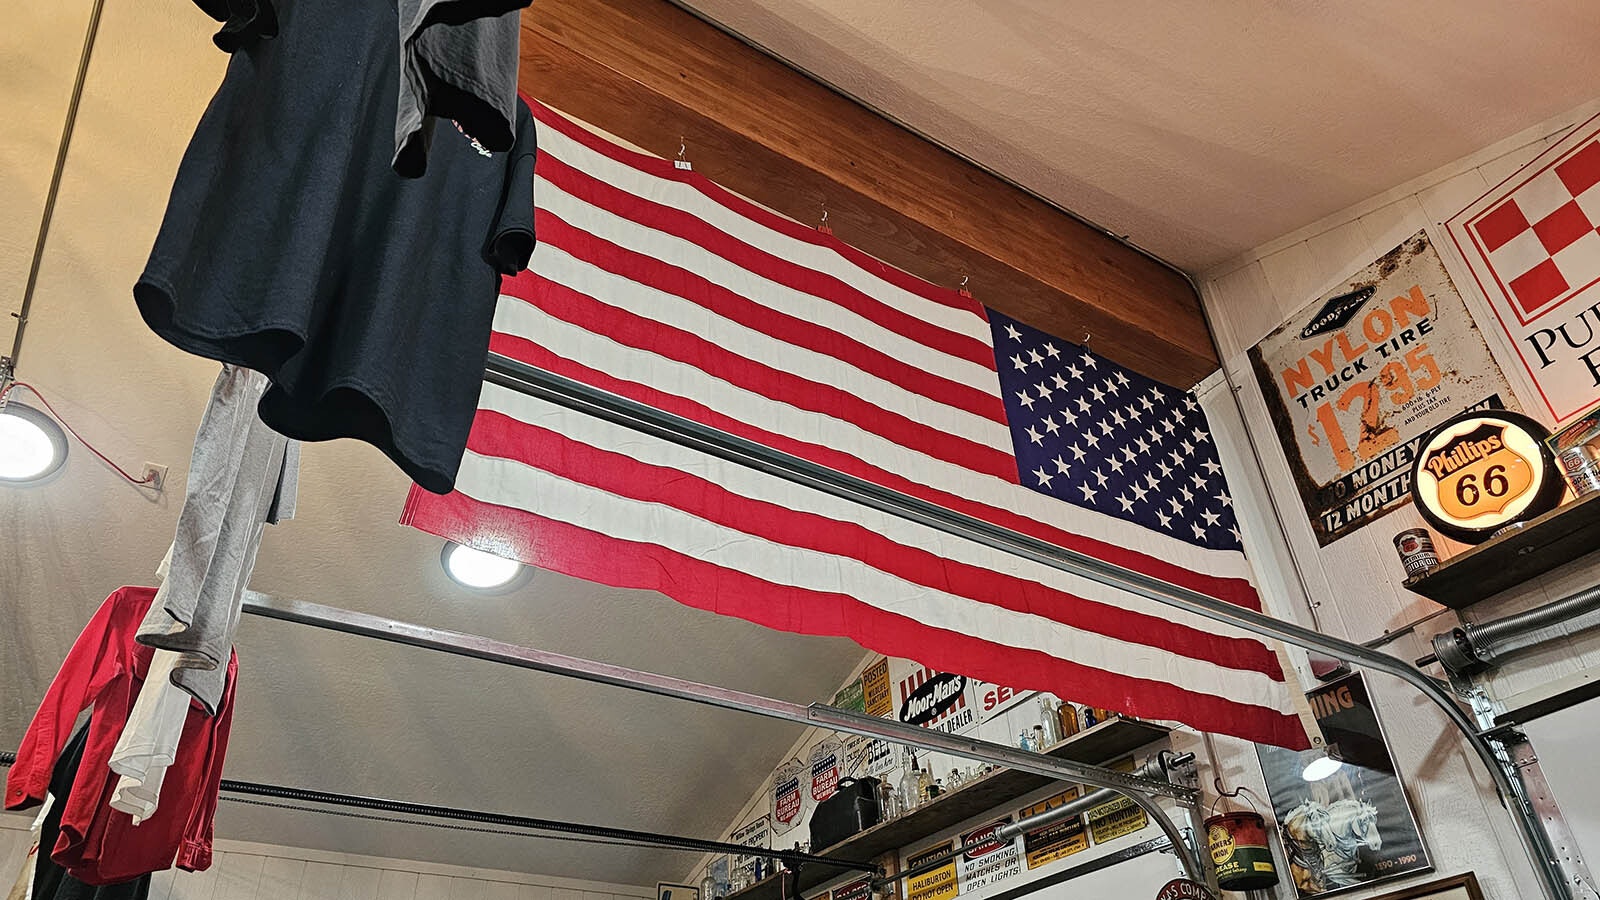 The American flag flies over all.